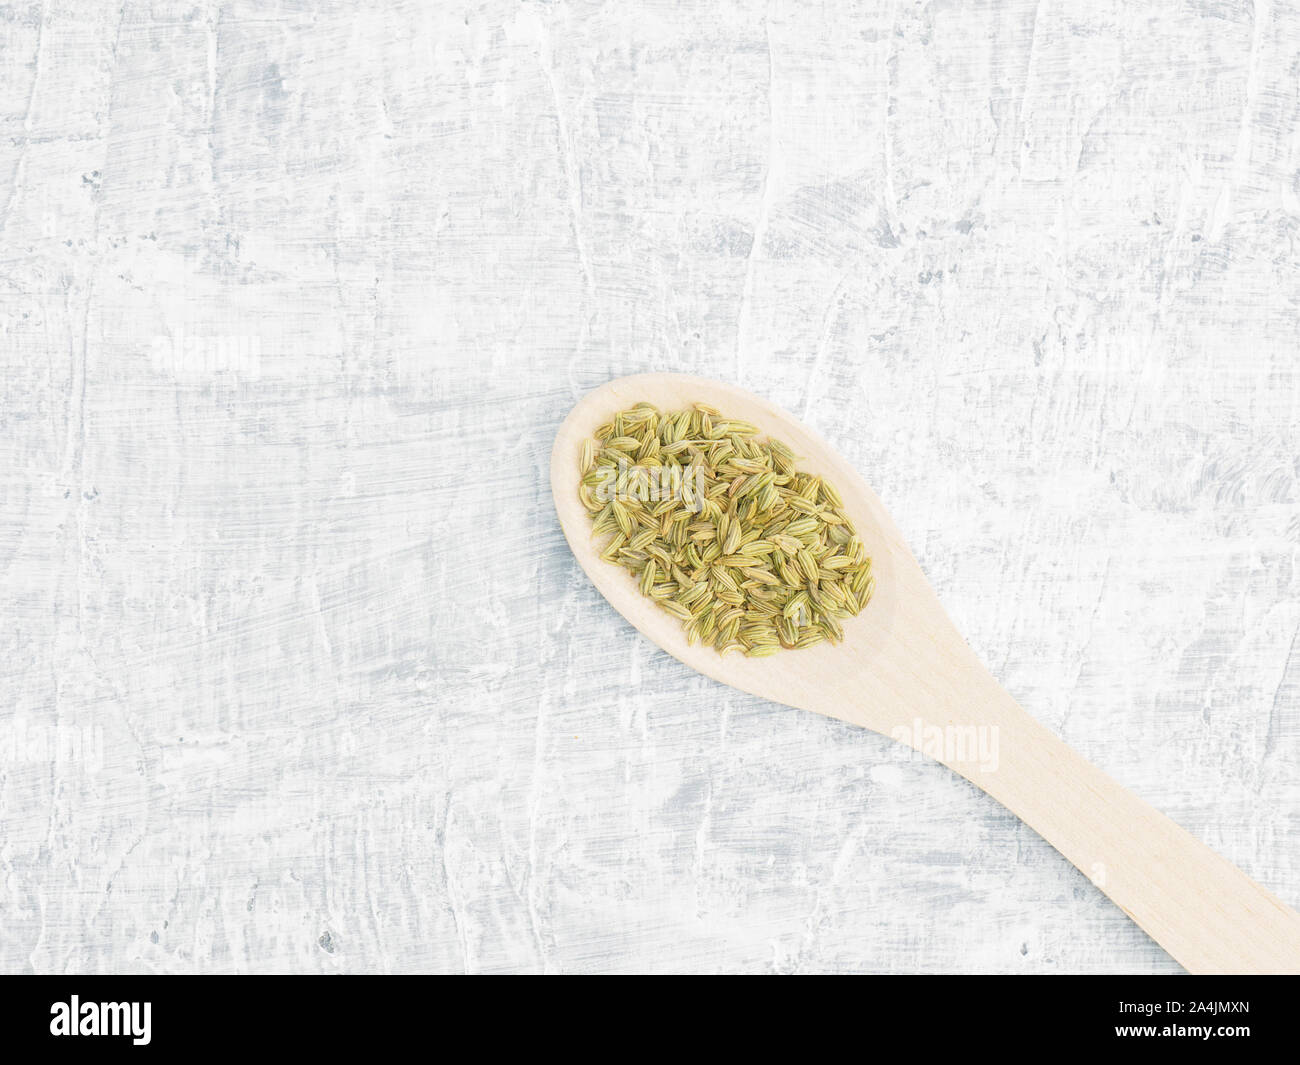 Spices and herbs help maintain good health and improve appetite, top view on white concrete background. Fennel in wooden spoon. Modern apothecary, nat Stock Photo